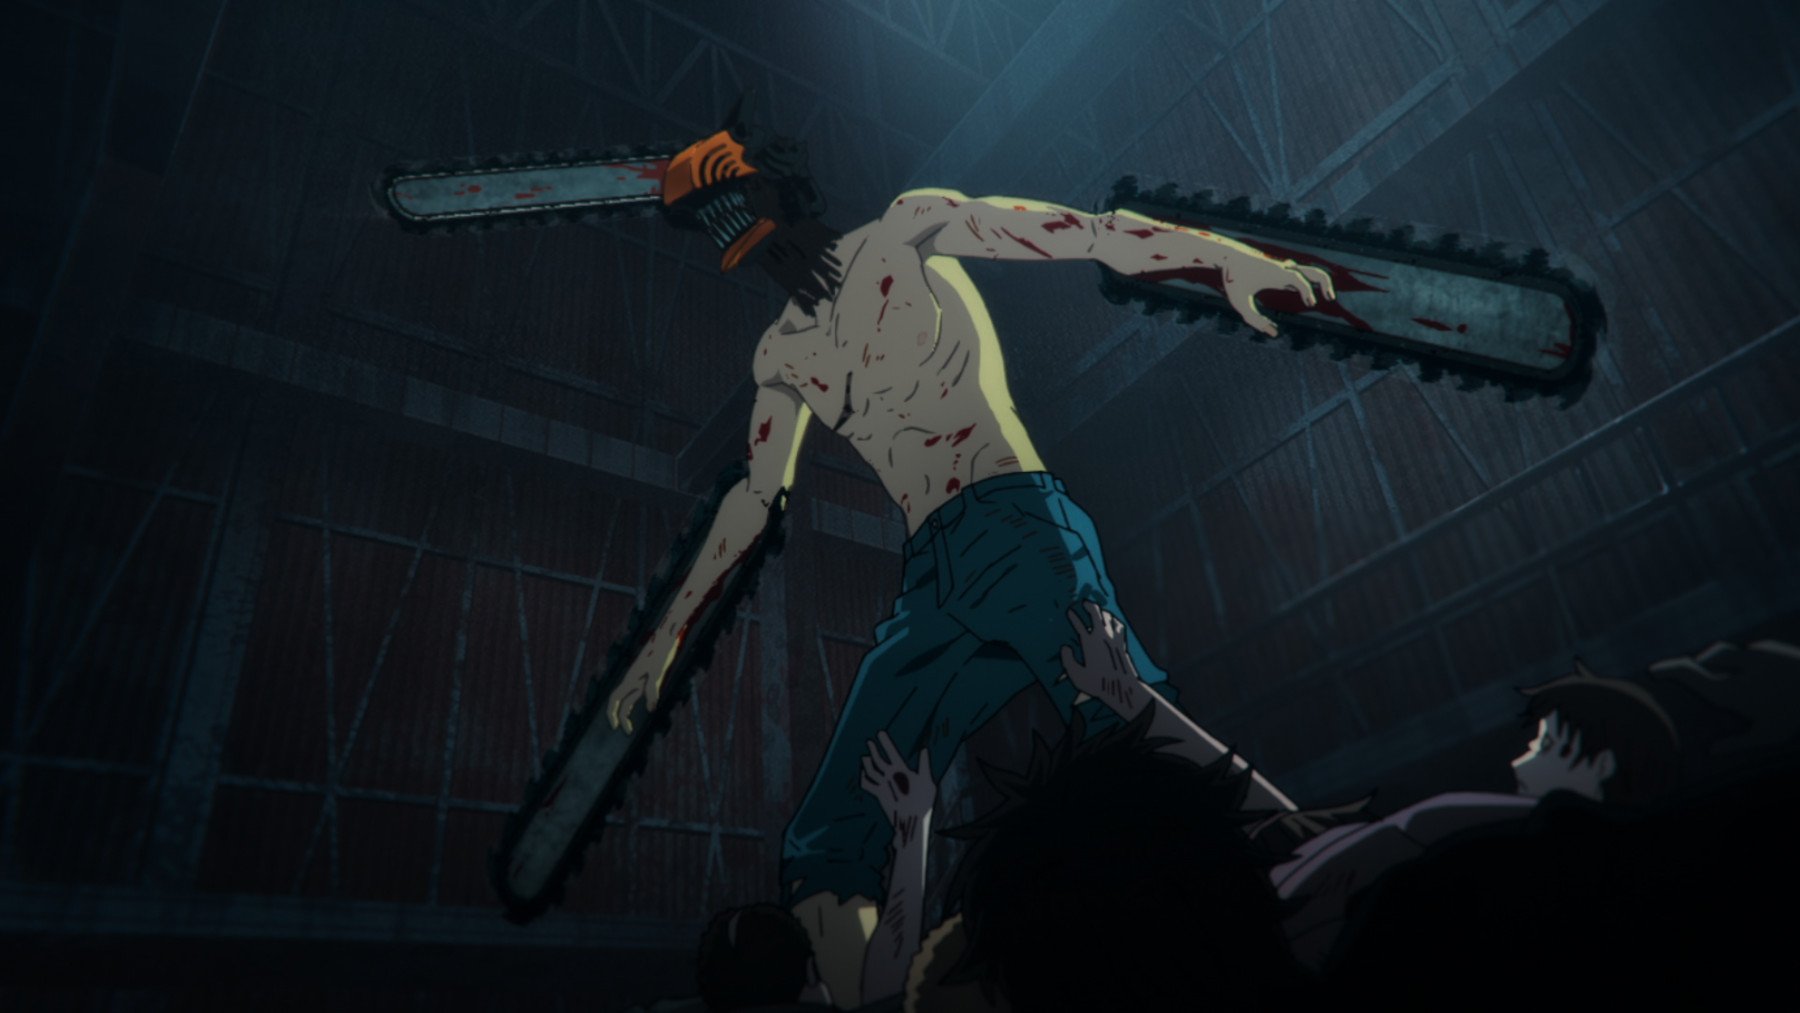 Denji in his Chainsaw Devil form for our article about how 'Chainsaw Man' is not canceled in the U.S. He's shirtless, has chainsaws sticking out of his head and arms, and is standing over several bodies.